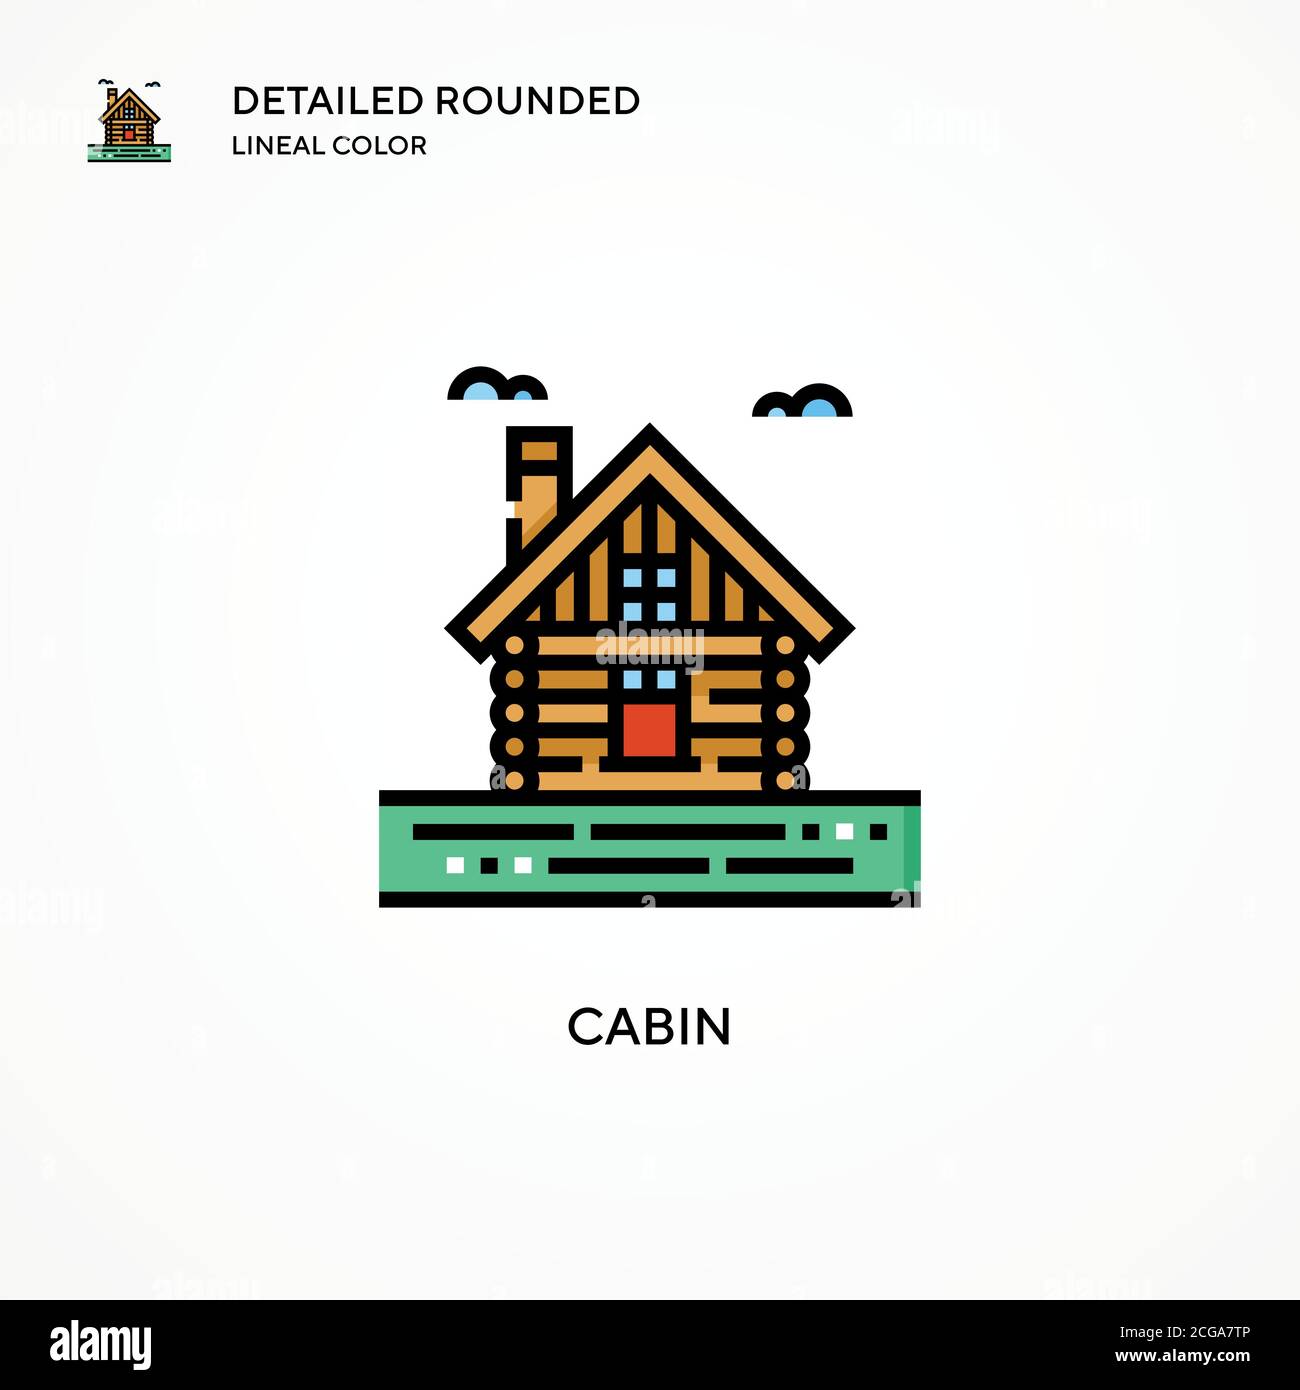 Cabin vector icon. Modern vector illustration concepts. Easy to edit and customize. Stock Vector